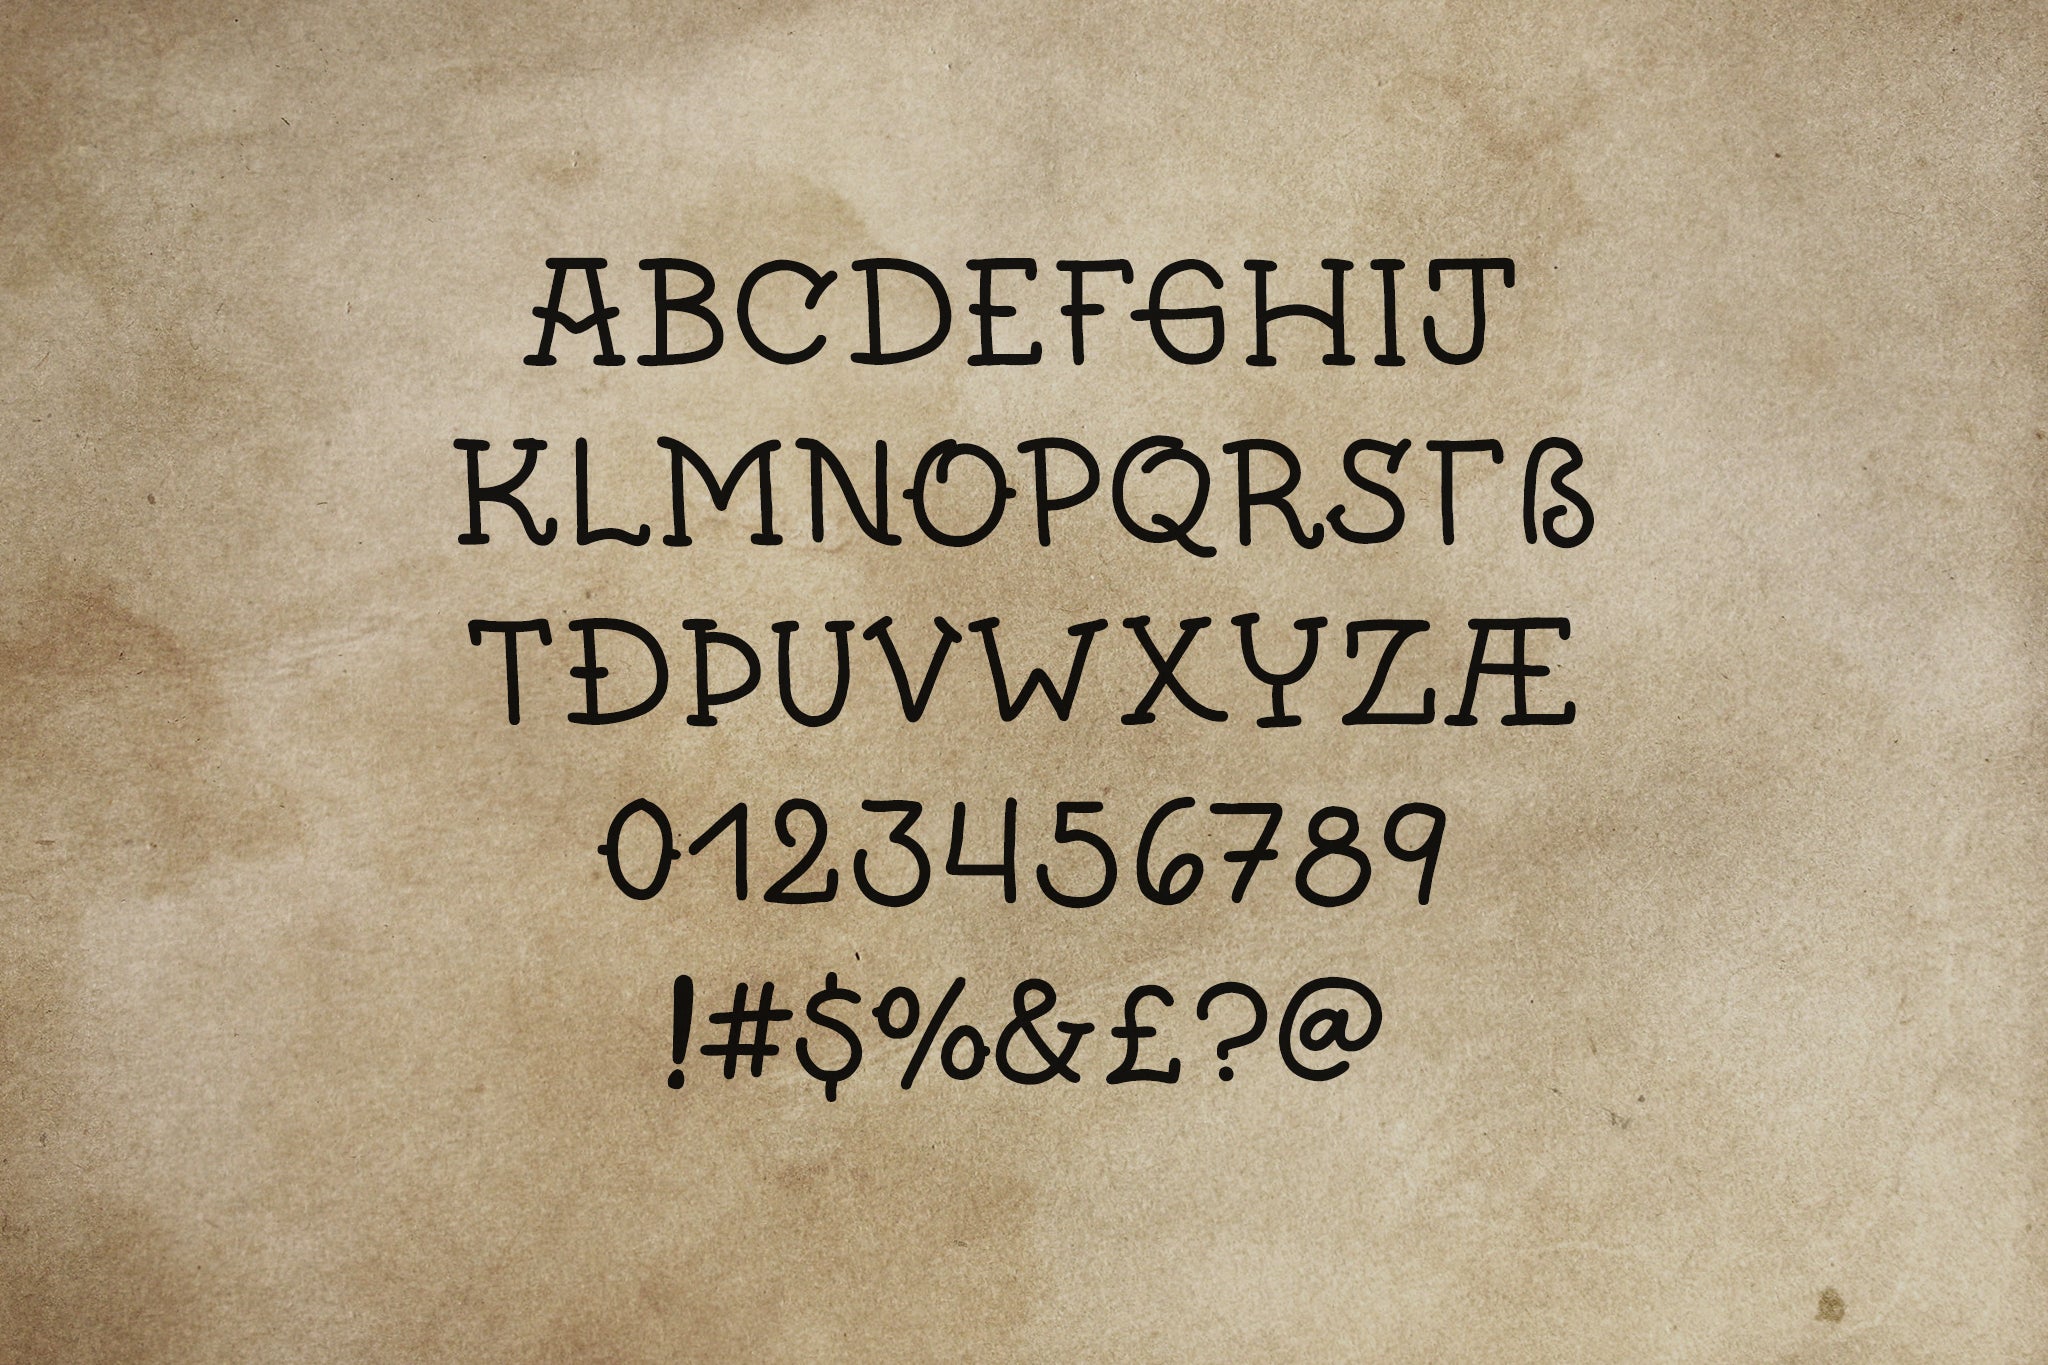 Crazy Traveler traditional tattoo font by Out of Step Font Company